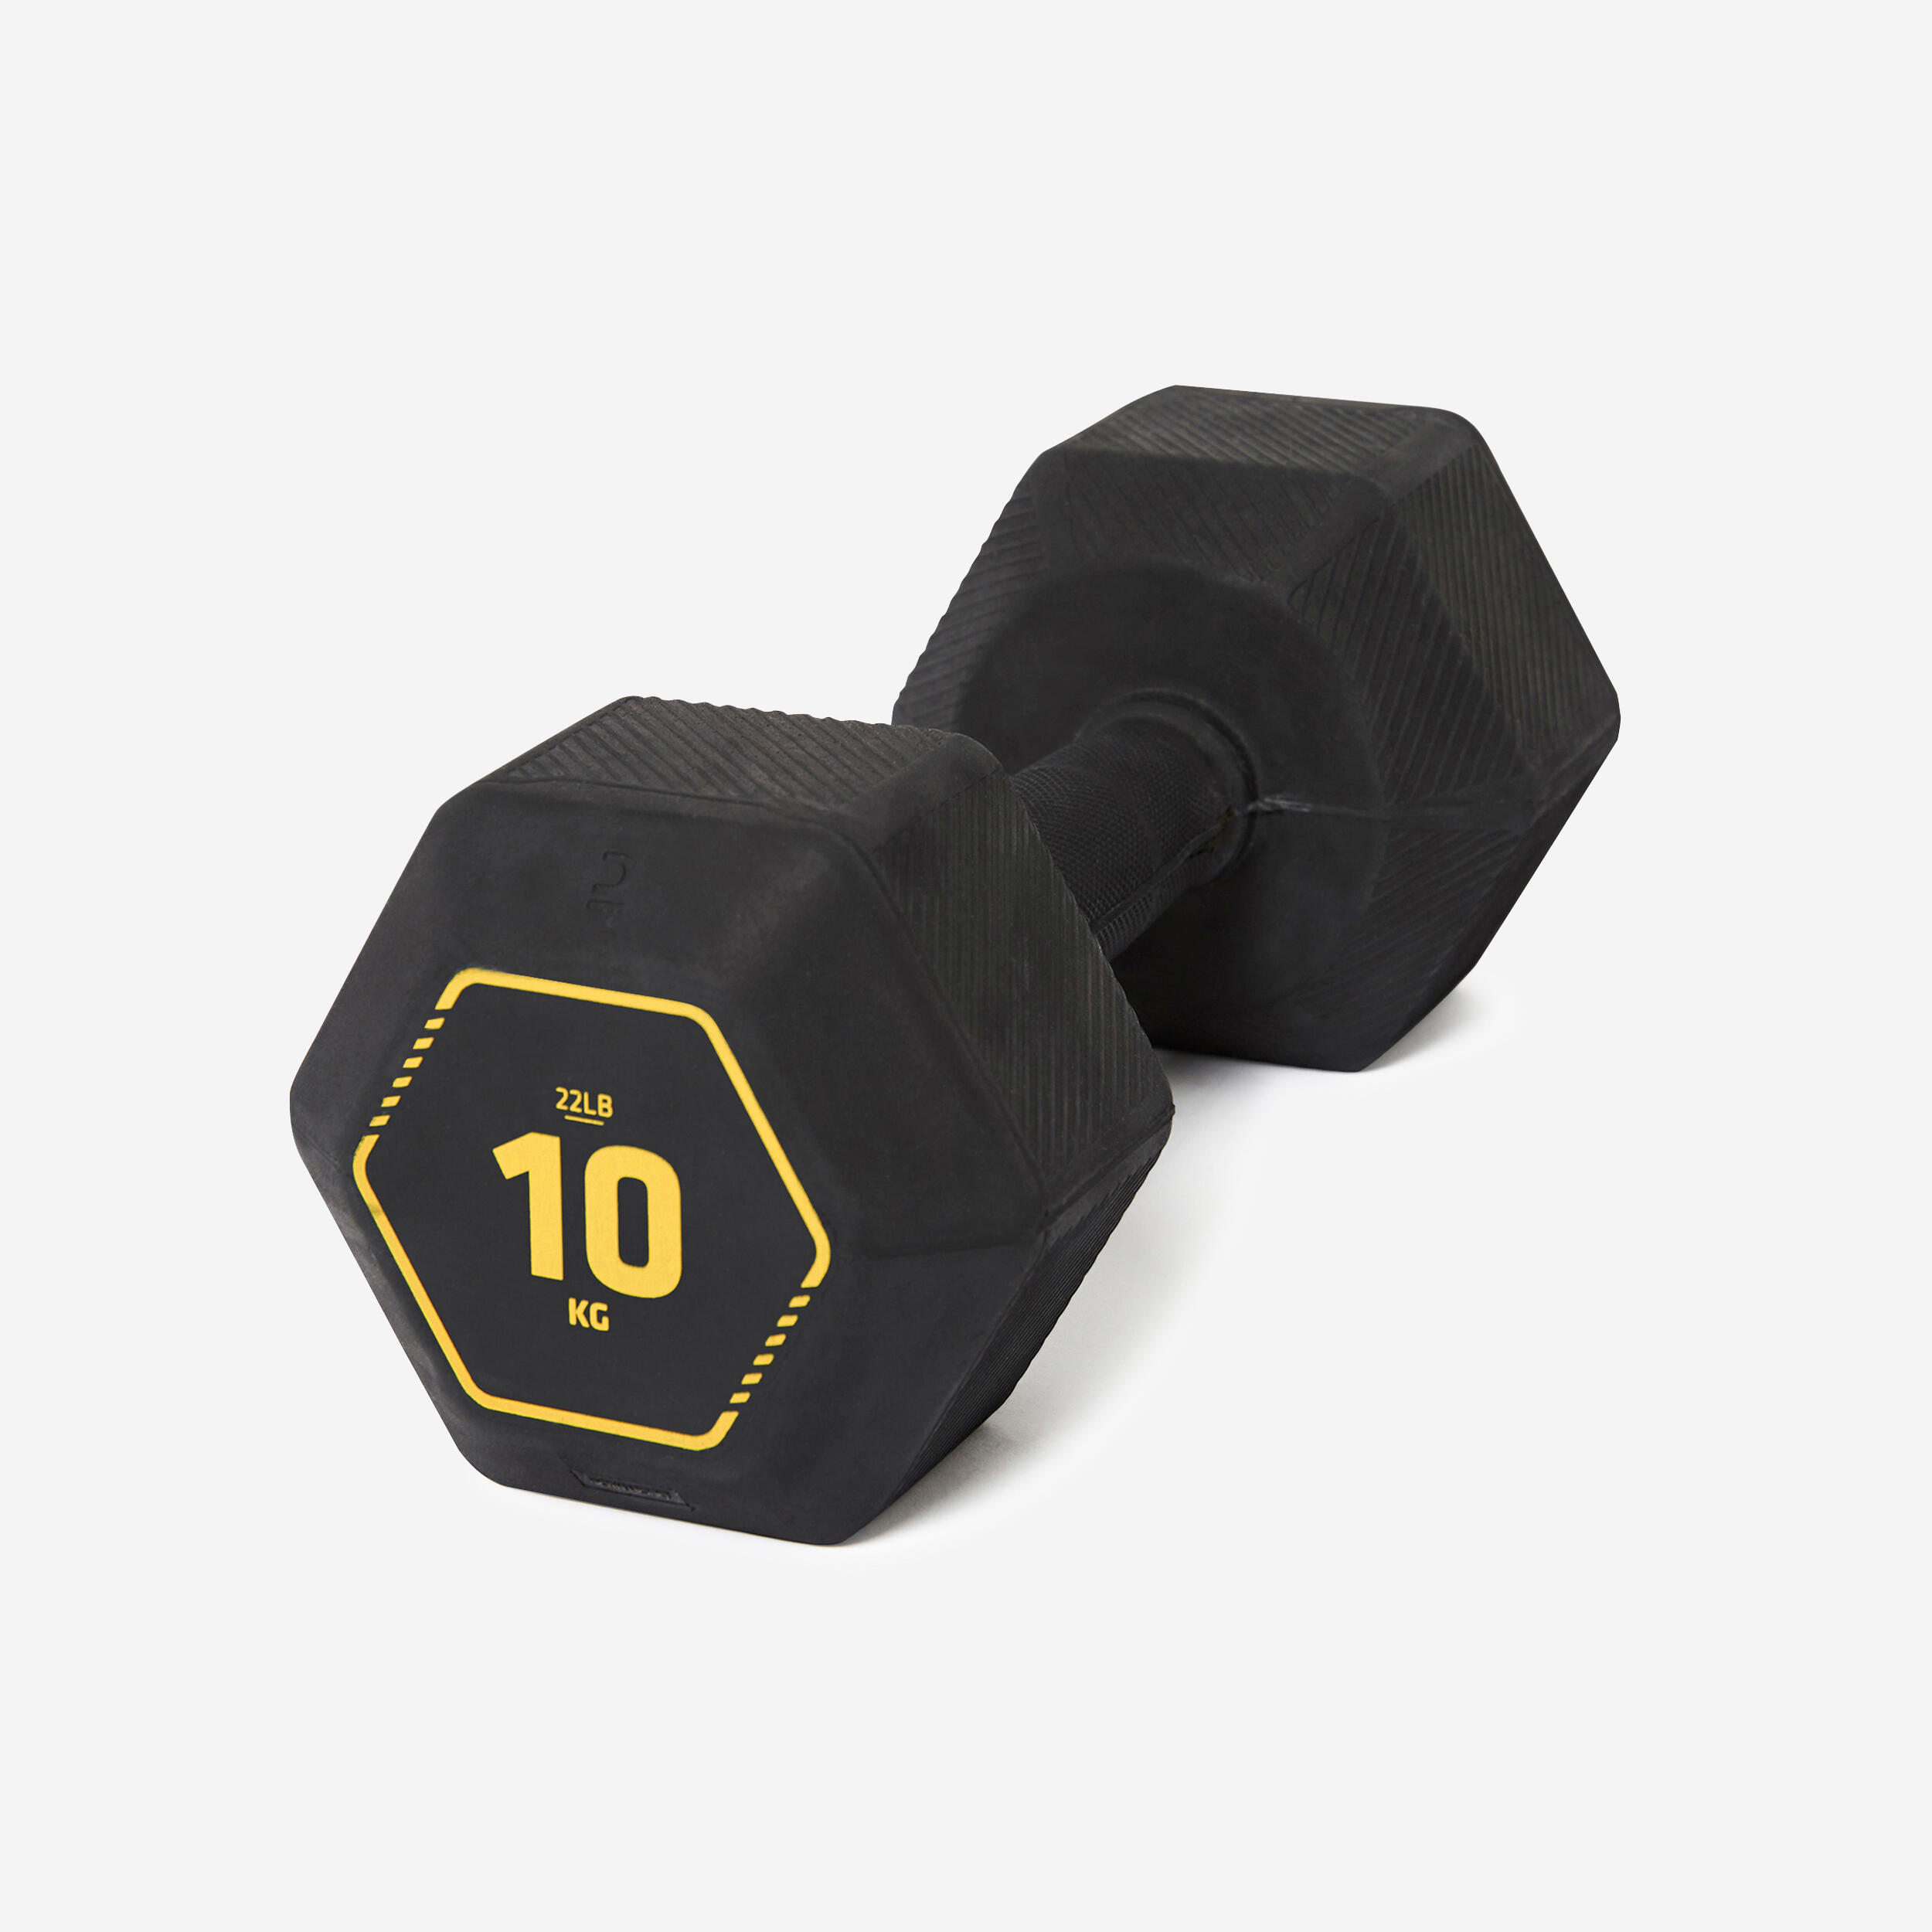 Cross Training and Weight Training Hex Dumbbells 10 kg - Black 1/3